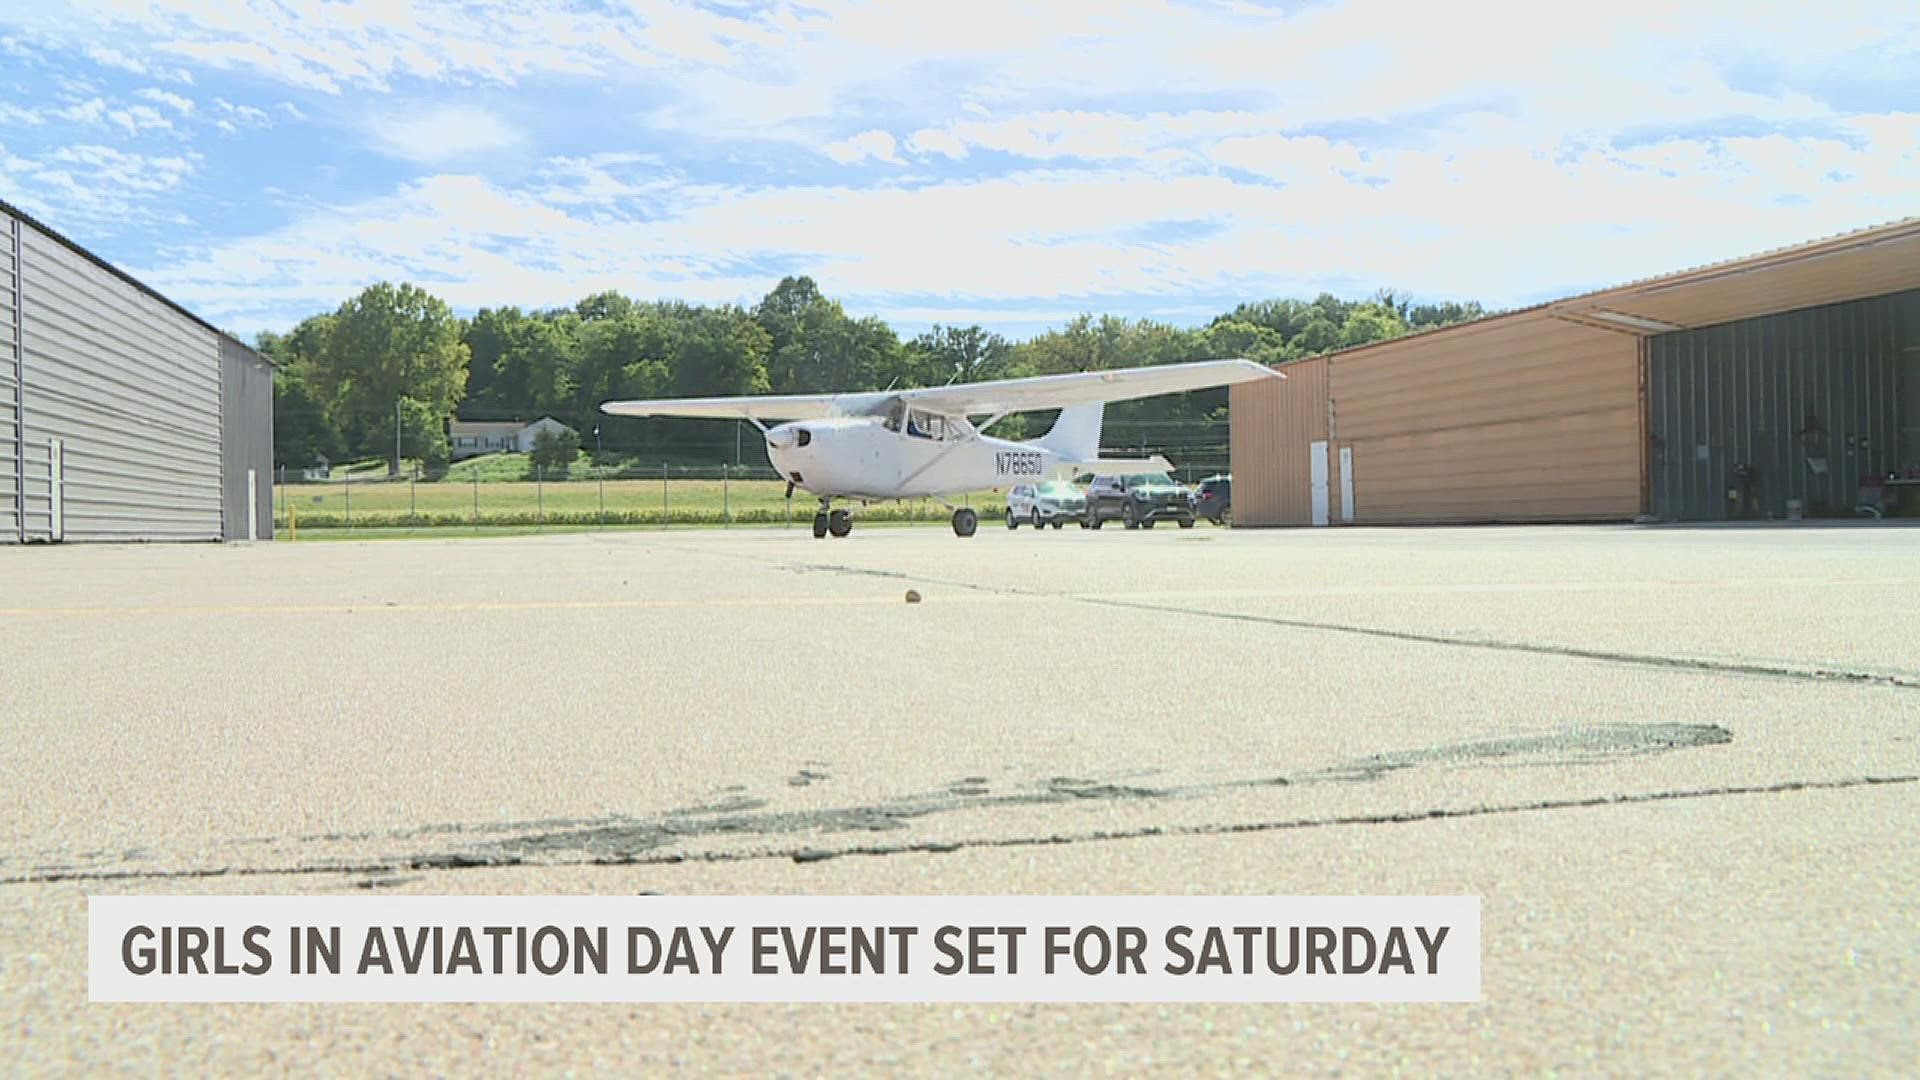 An all-female flight crew from the Illinois Army National Guard's 106th Aviation Regiment based in Peoria will be on hand to help get women into aviation.